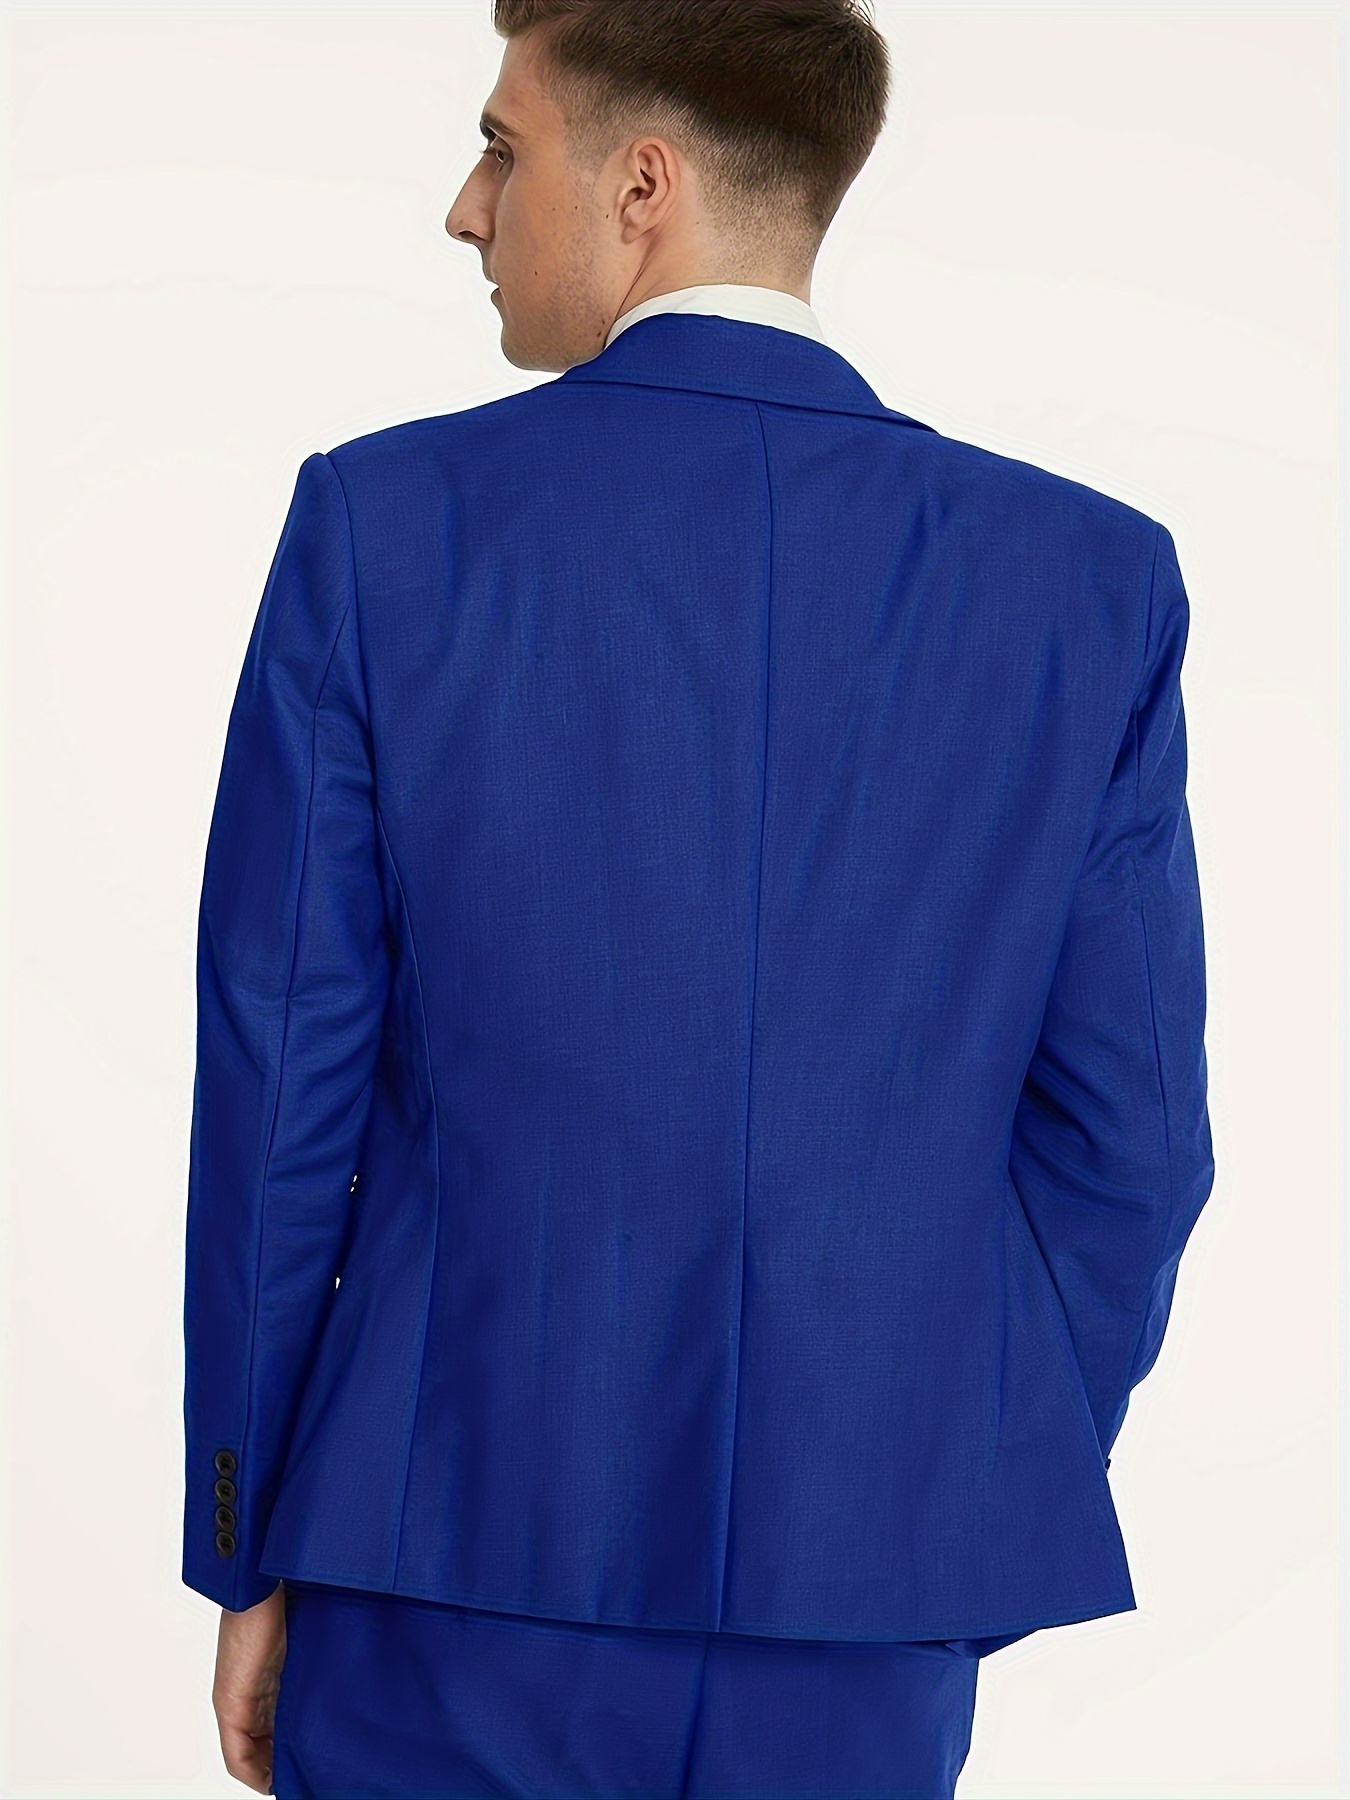 Royal Blue double breasted Pant Suit